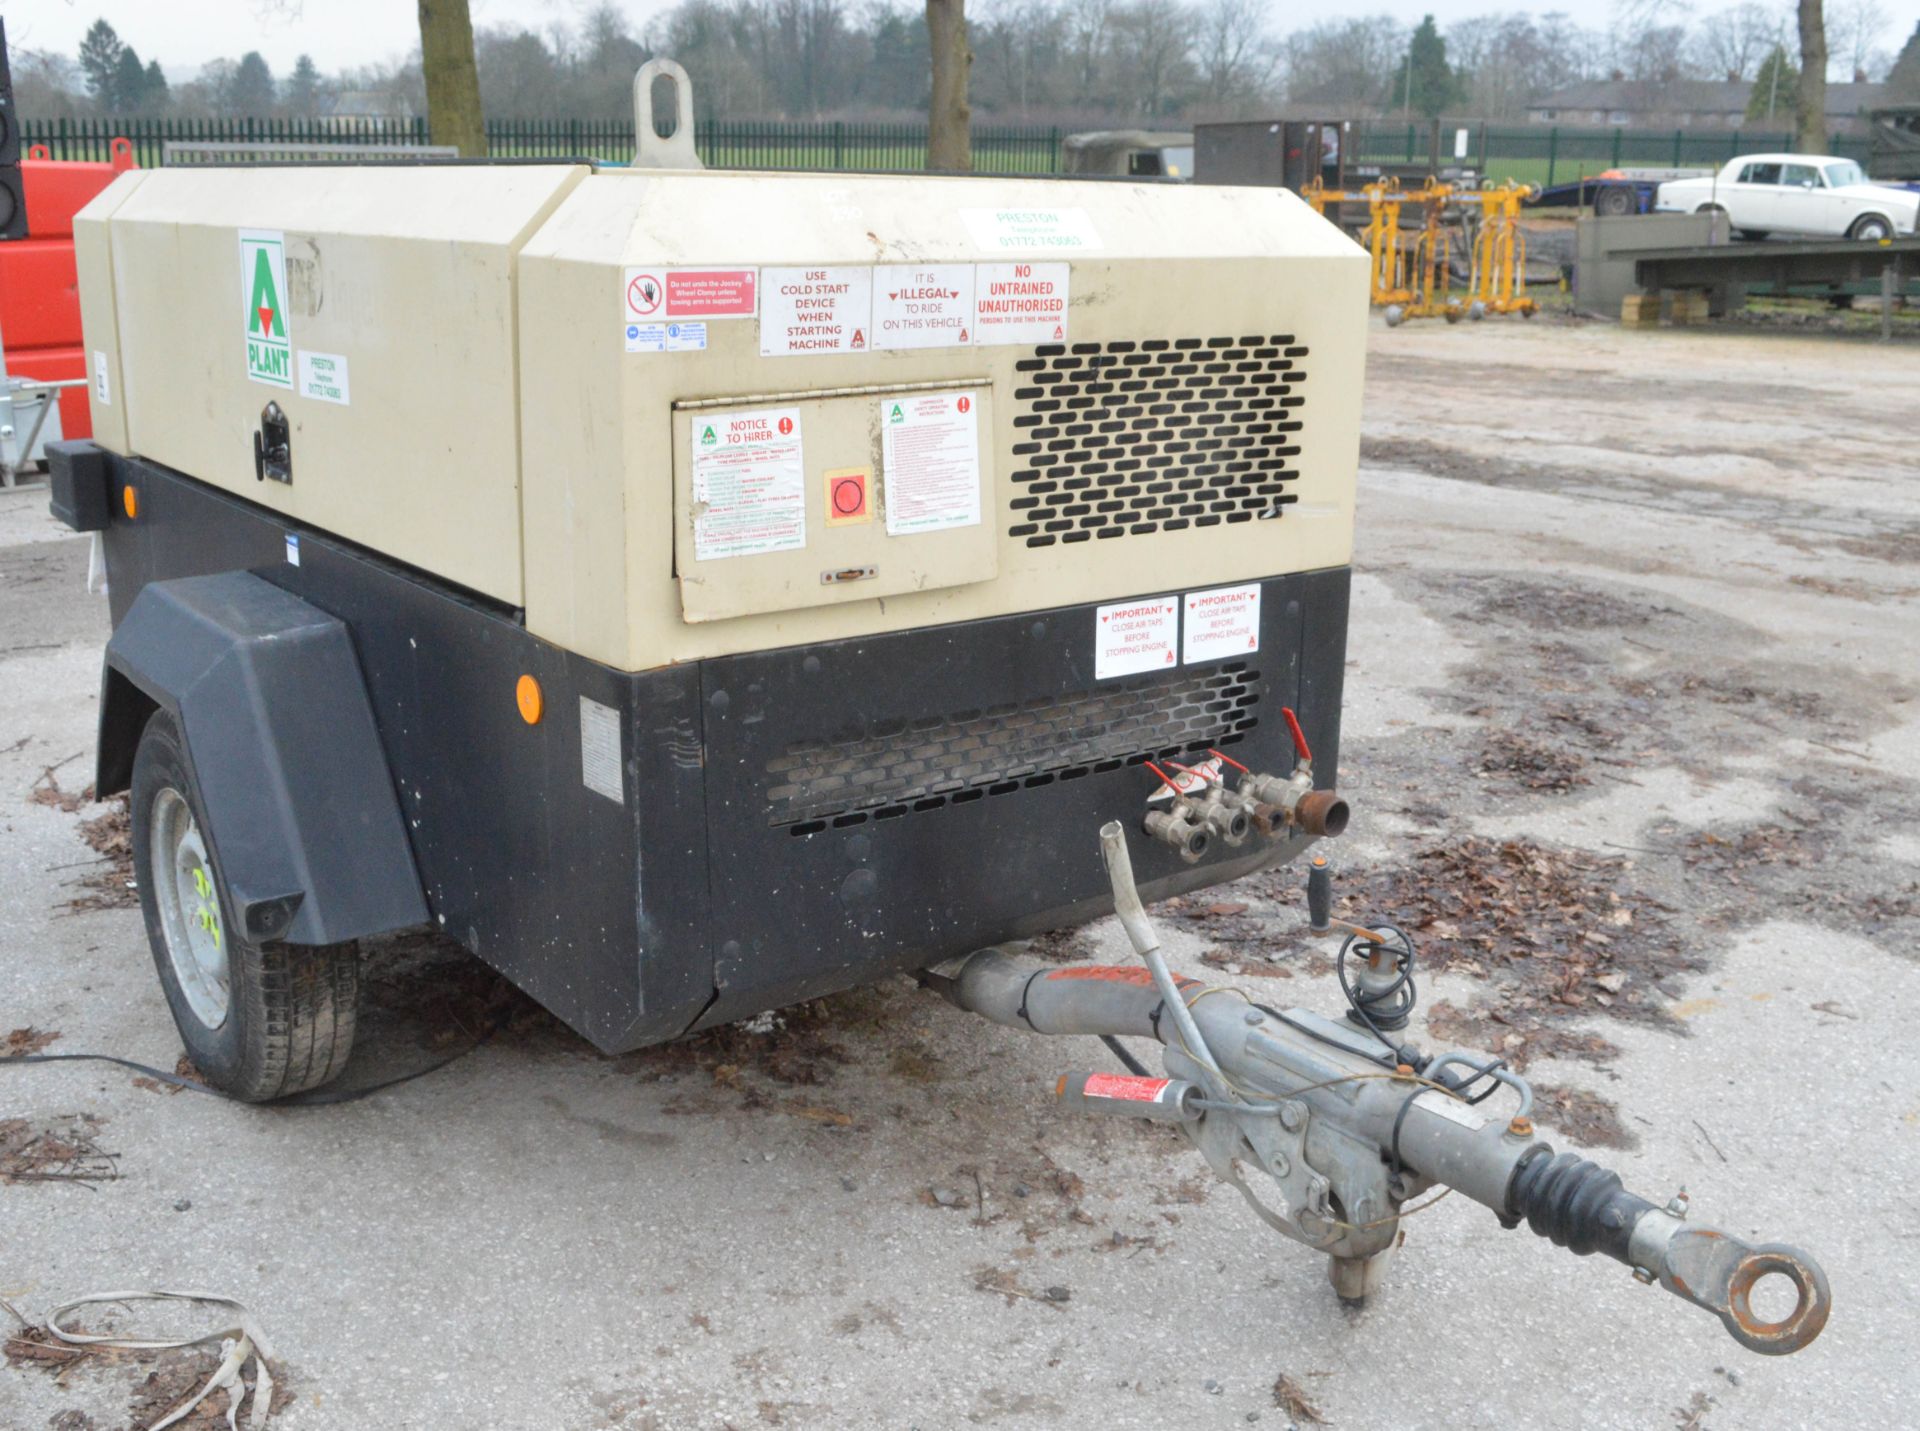 Ingersoll Rand 771 250 cfm diesel driven mobile air compressor Year: 2011 S/N: BY523009 Recorded